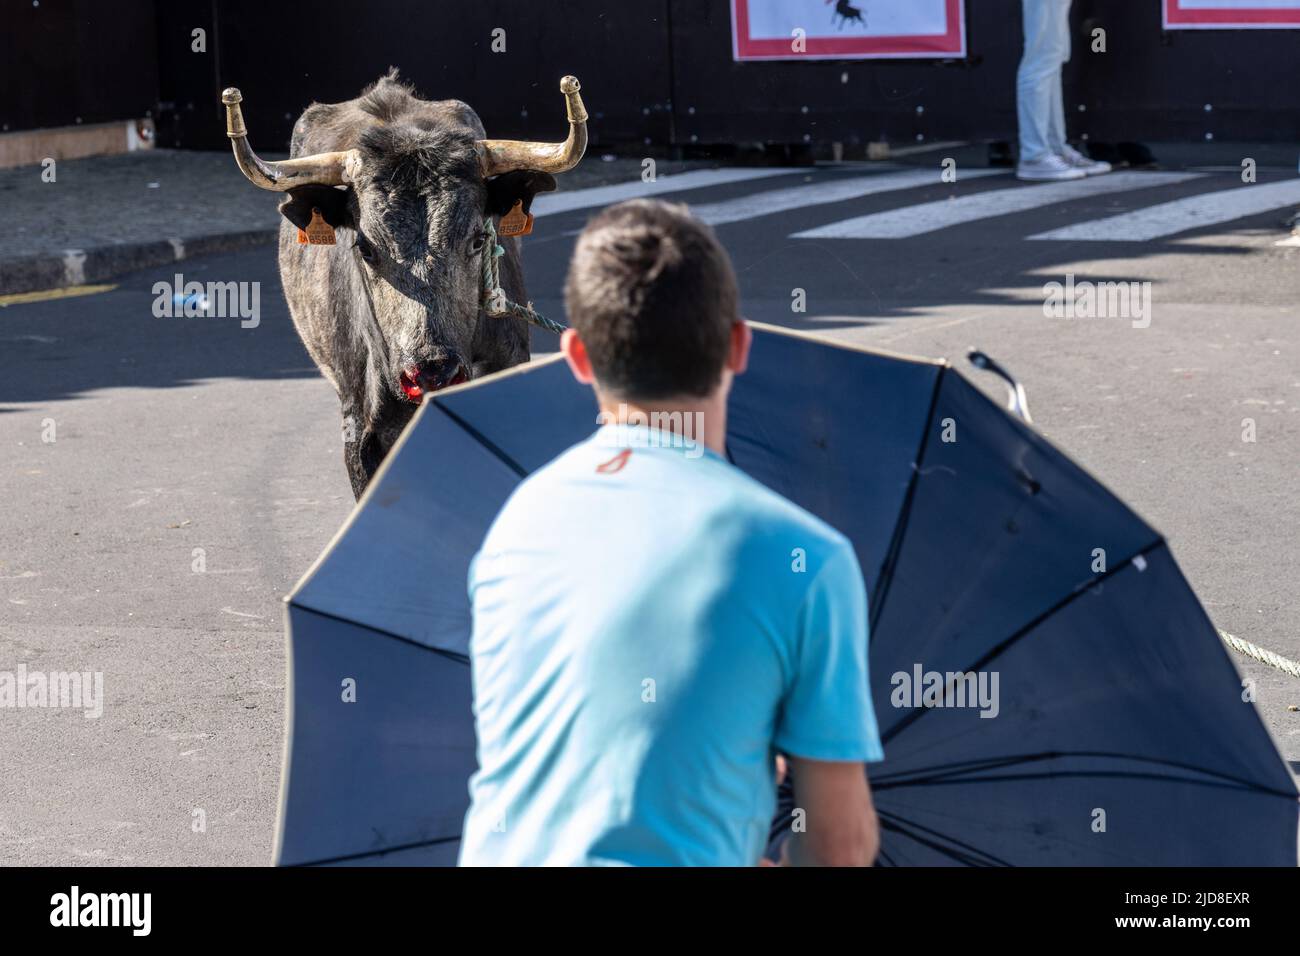 A bull prepares to charge a capinha or amateur bullfighter during a tourada a corda, also called a bull-on-a-rope at the Sanjoaninas festival, June 18, 2022 in Angra do Heroísmo, Terceira Island, Azores, Portugal. During the uniquely Azorean event a bull tied to a long rope runs loose as participants attempt to distract or run from the bull. Stock Photo